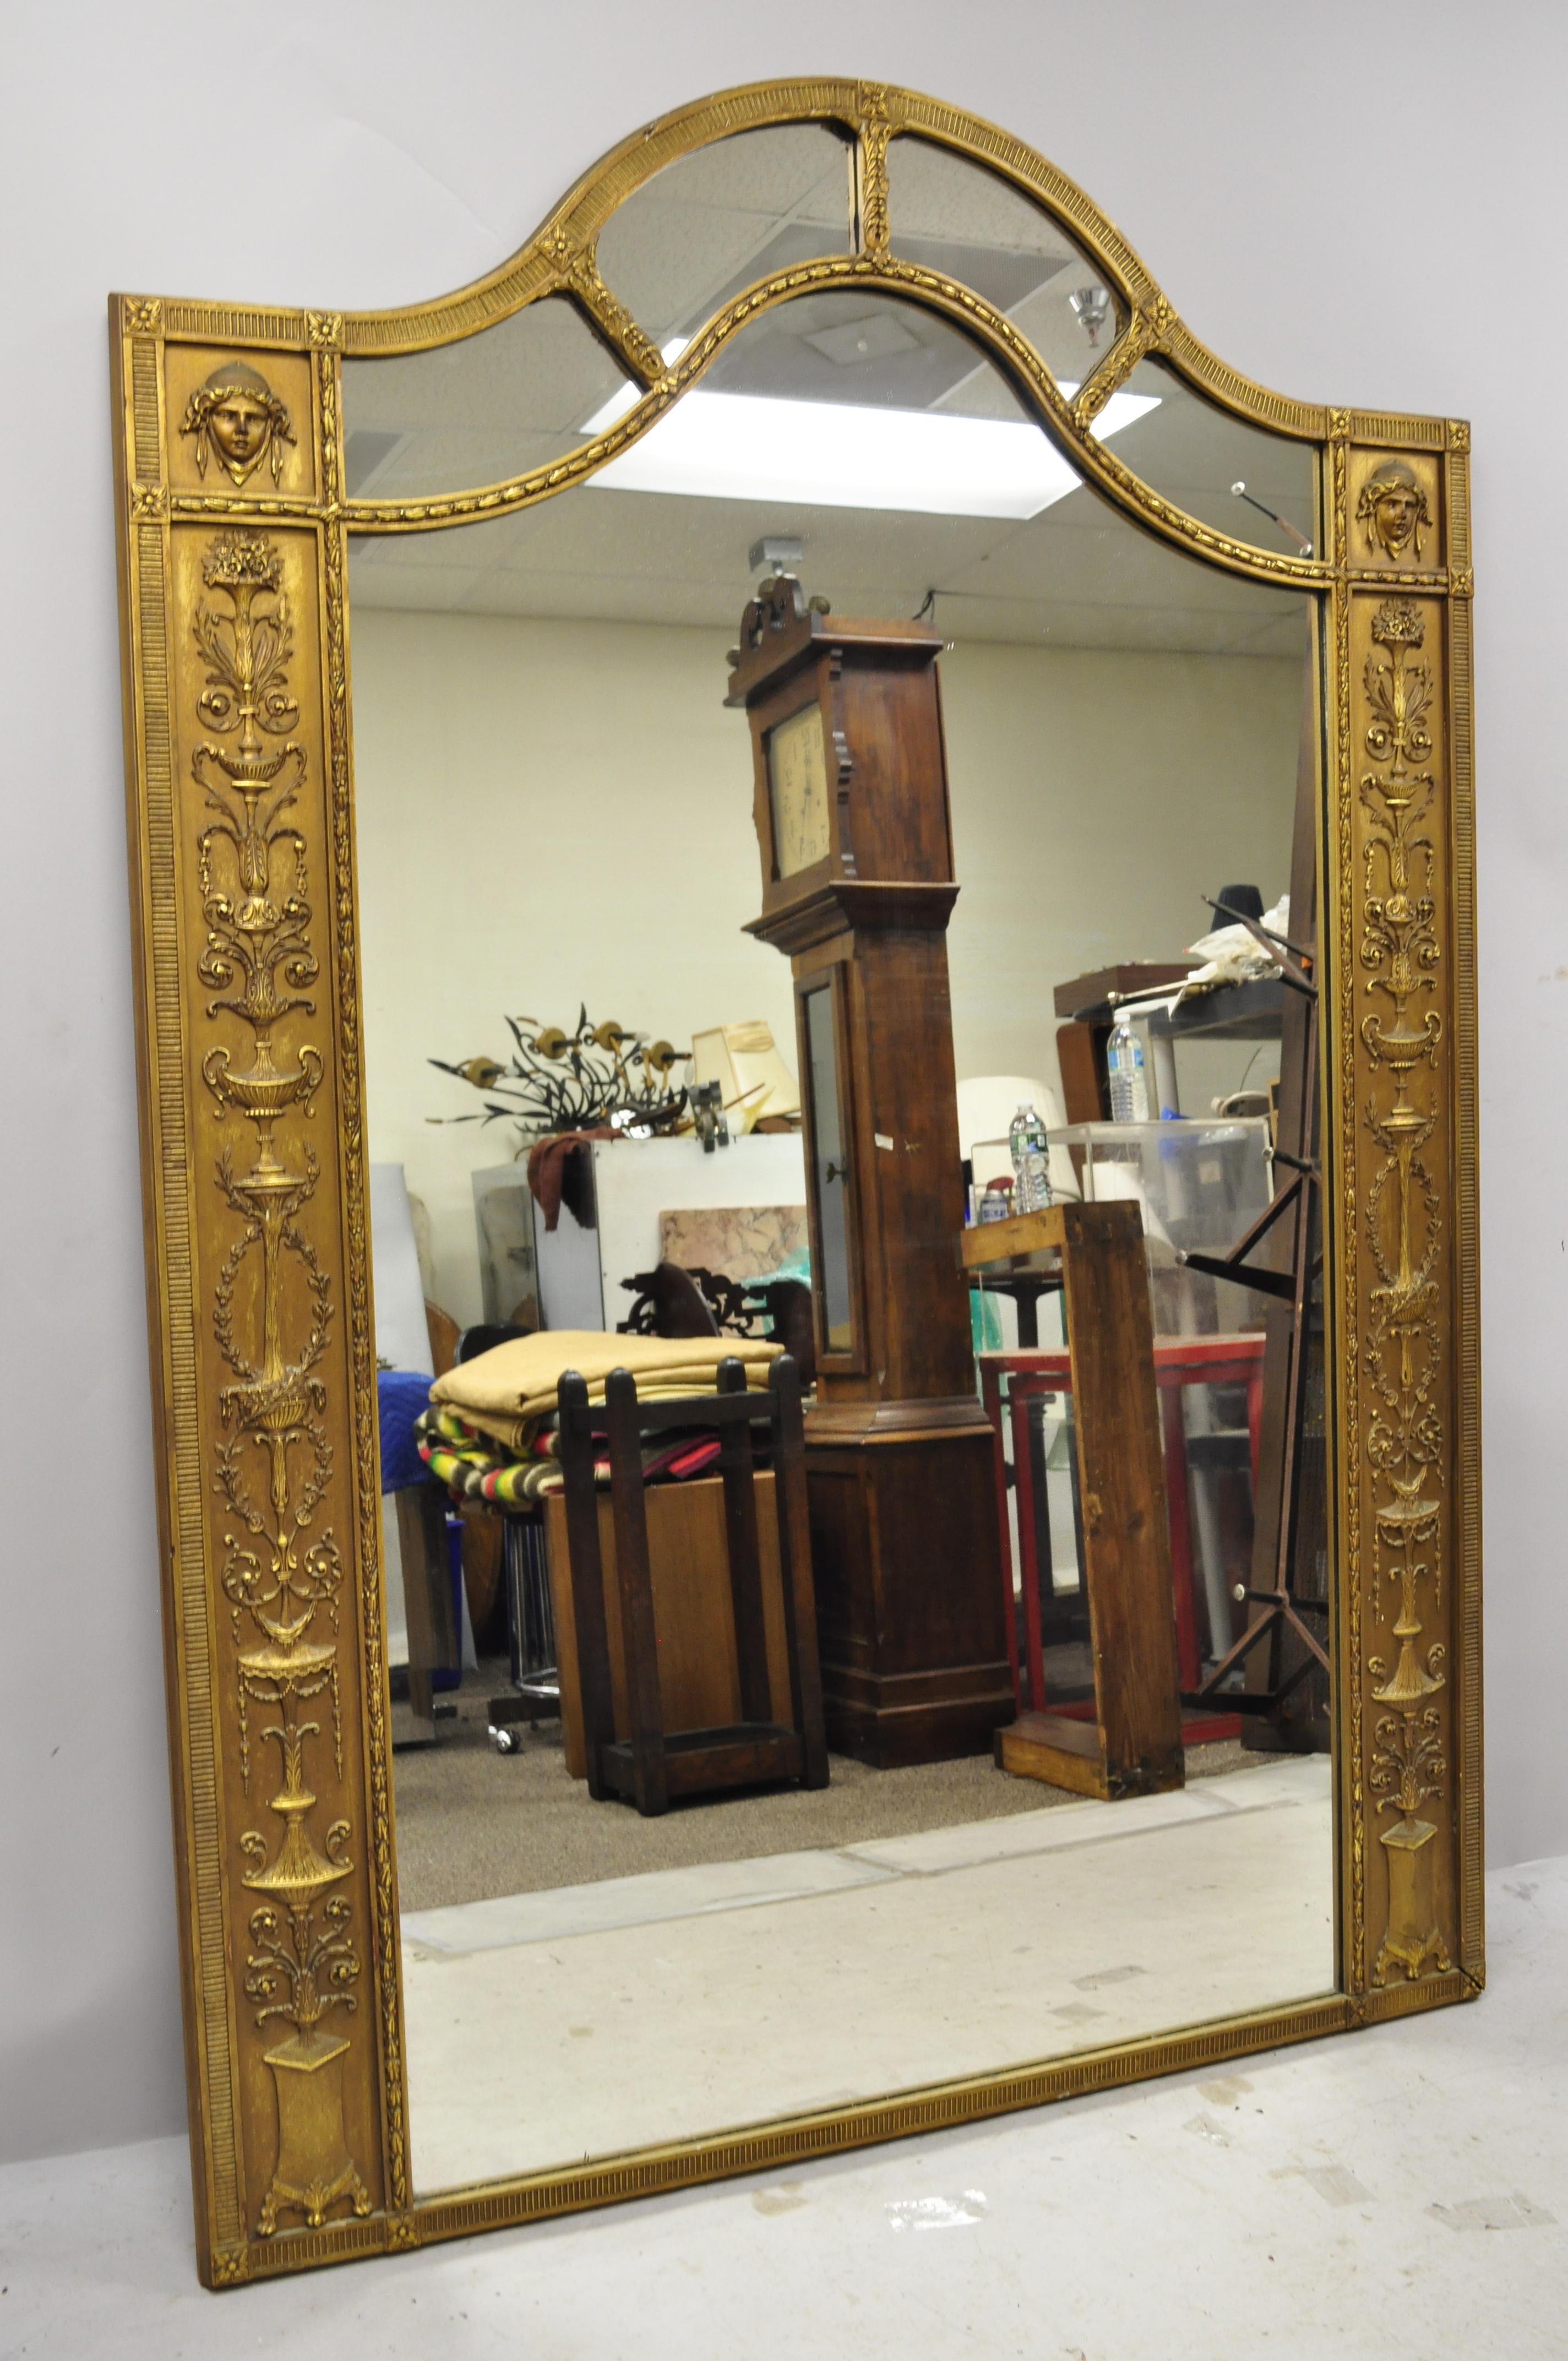 Antique French neoclassical style large trumeau floor mirror golf figural Gesso 76 x 54. Item features a large impressive size, gold gilt gesso figural details, maiden faces, urns and wreaths, distressed gold finish, very nice antique item, great